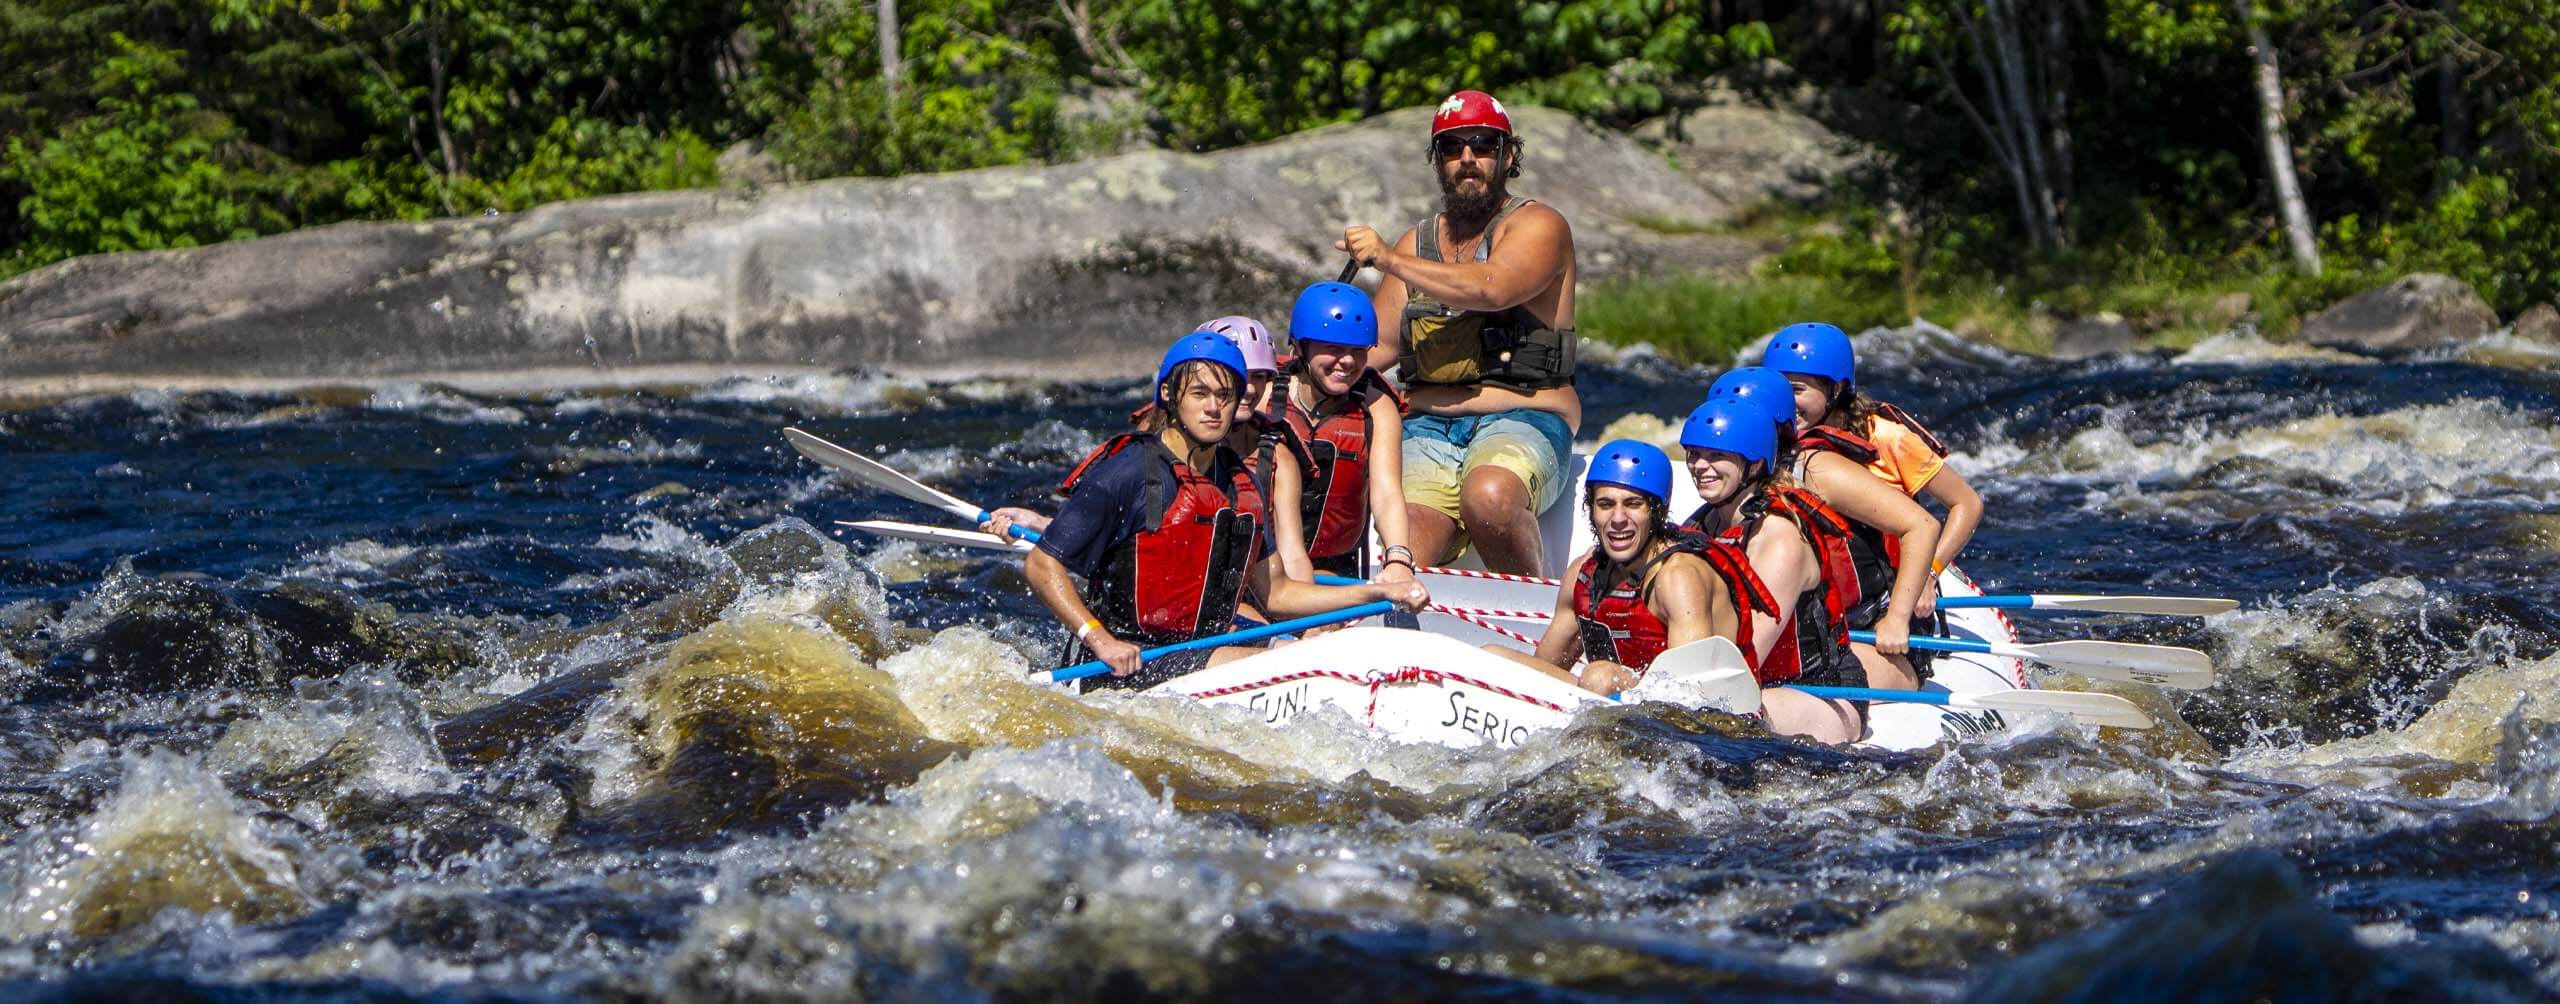 A photo of a group of people white water rafting